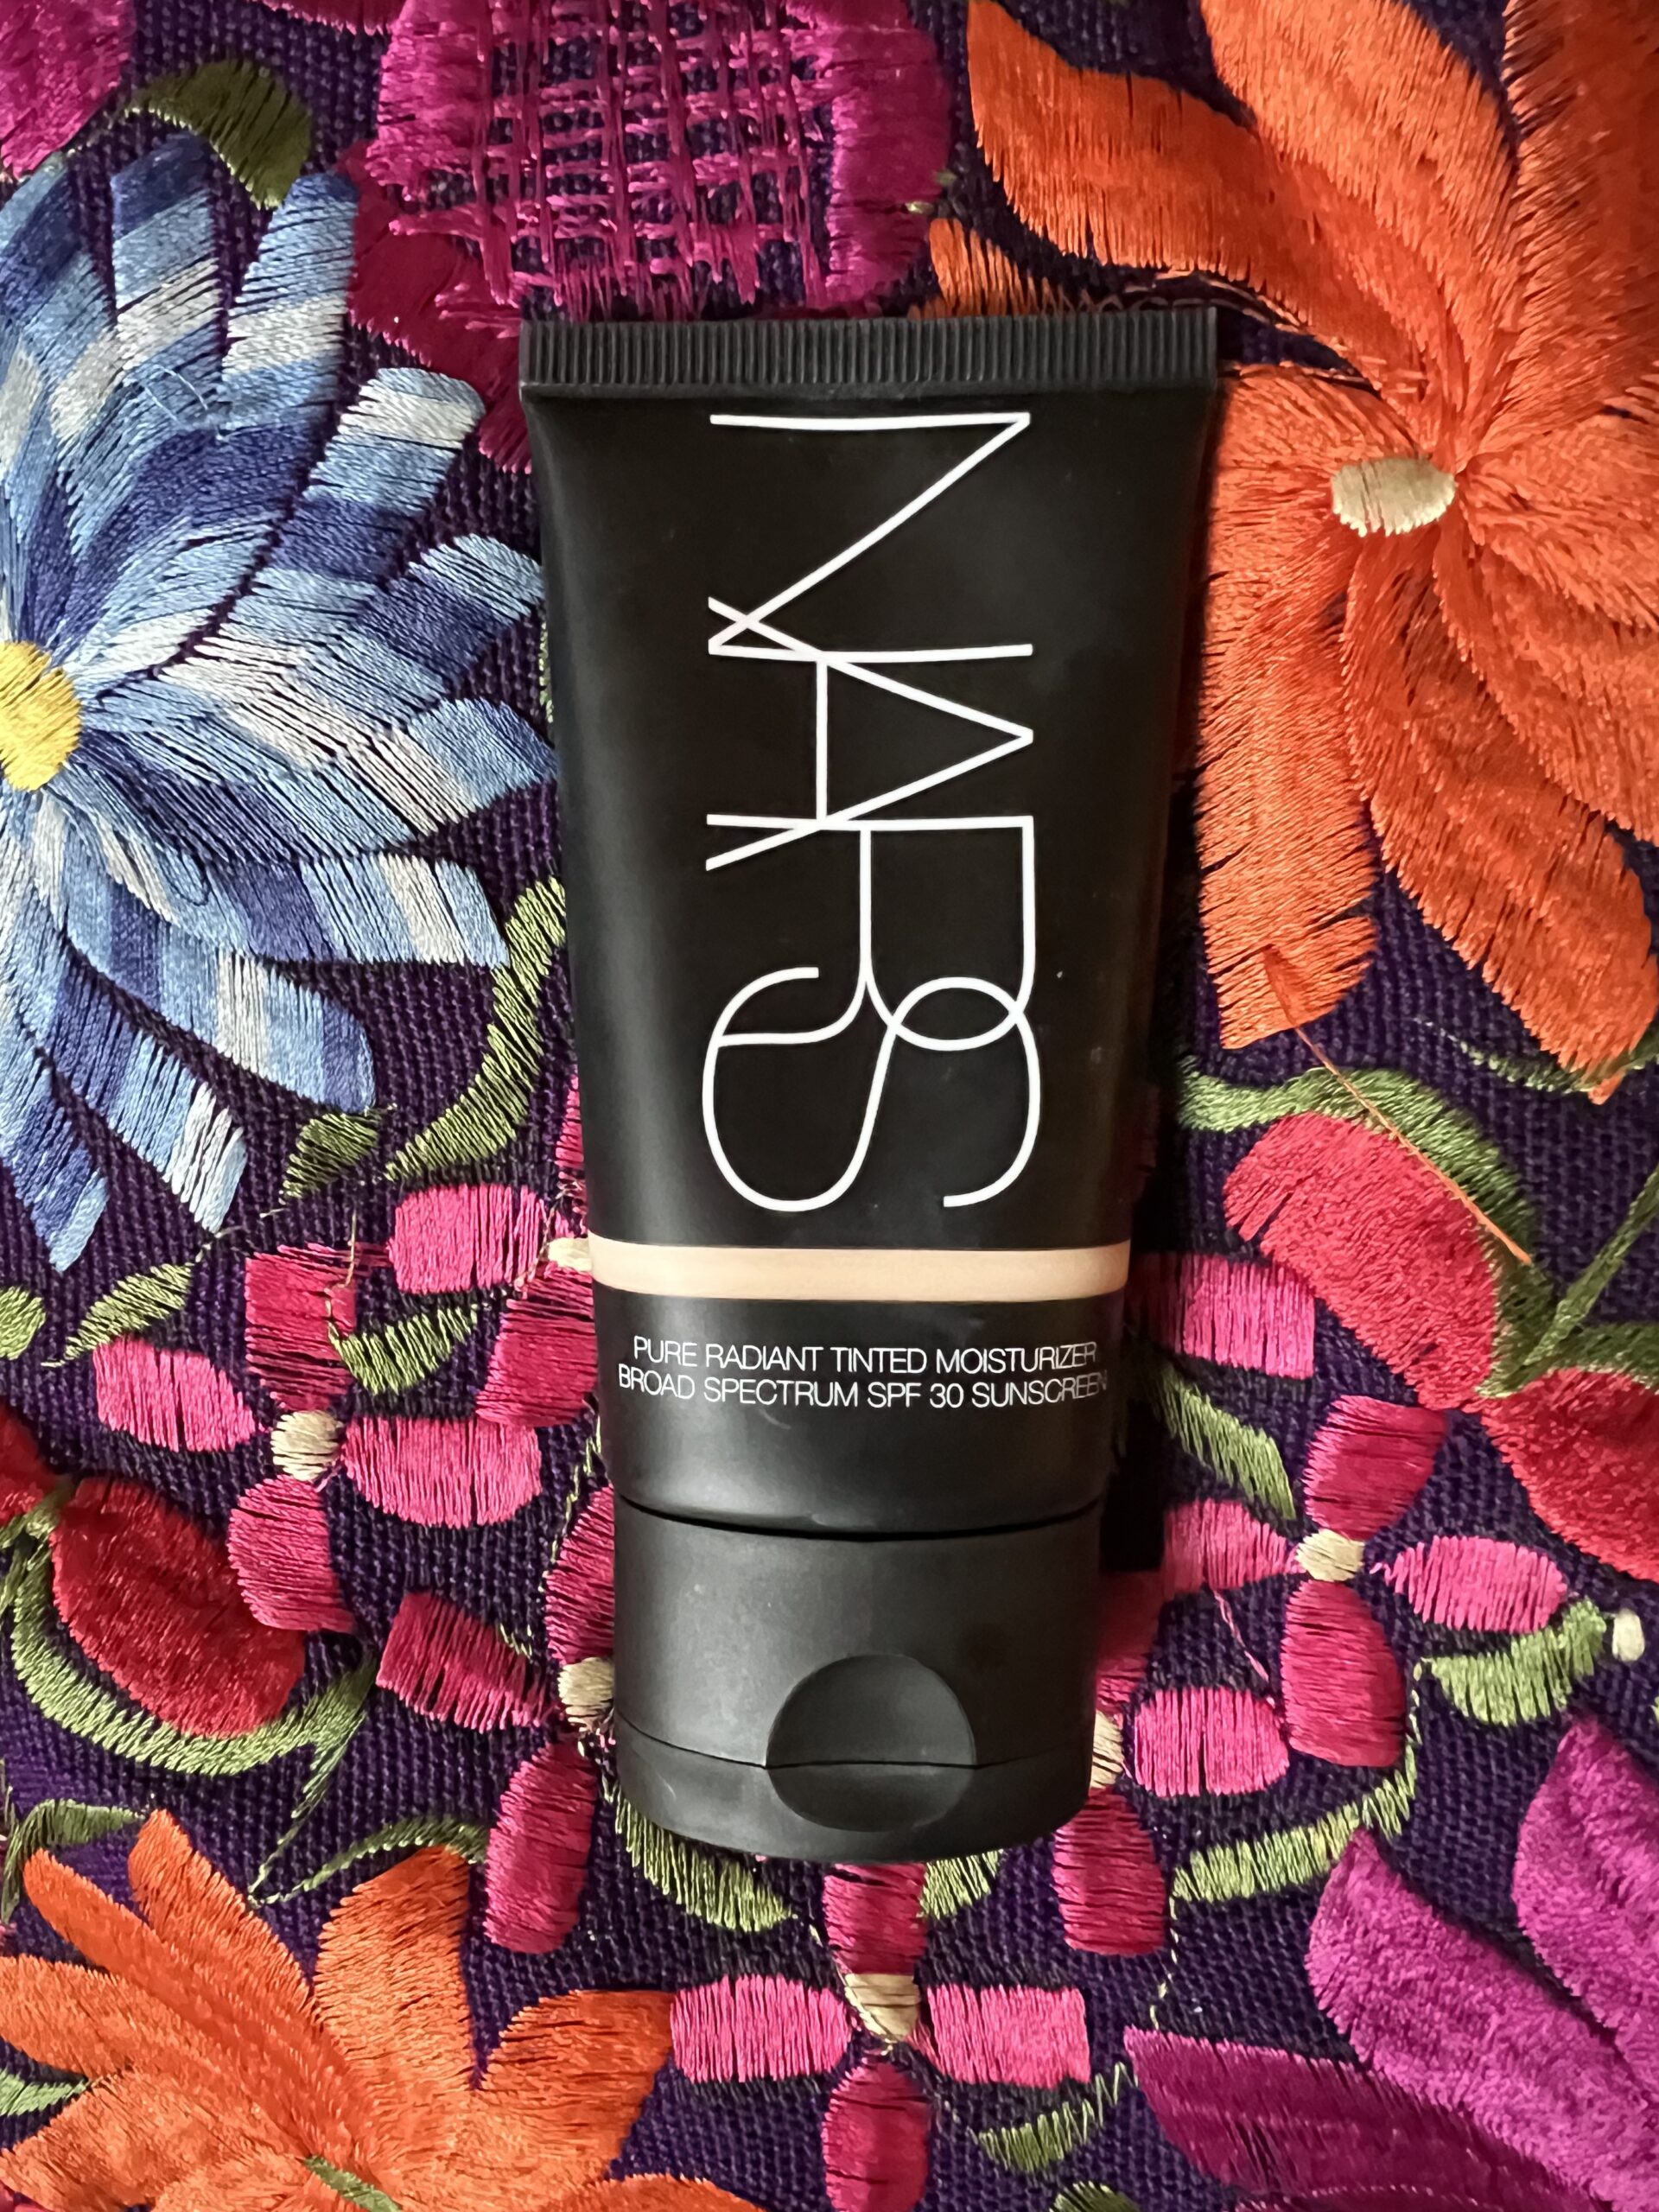 NARS foundation review 2